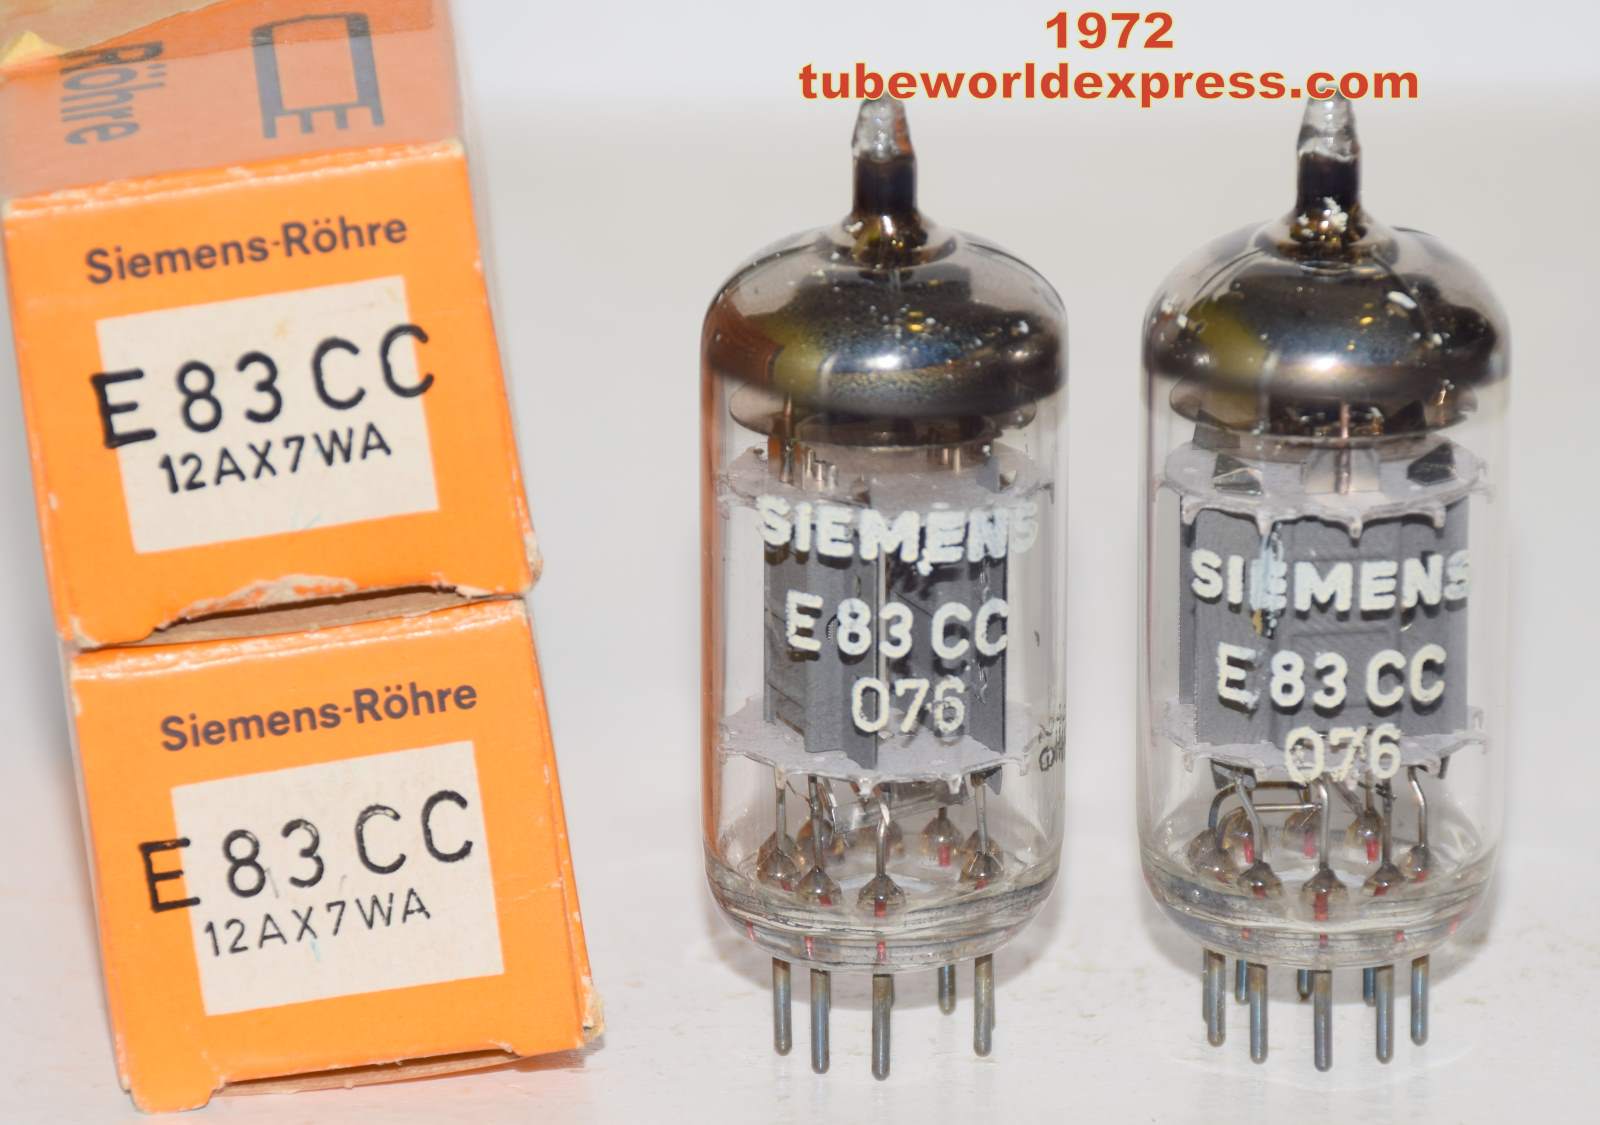 (!!!!!) (Best Siemens Pair 1972) E83CC=12AX7 Siemens Halske Germany NOS  triple mica 1972 printed in 1976 (1.0/1.3ma and 1.1/1.3ma) (best in phono  